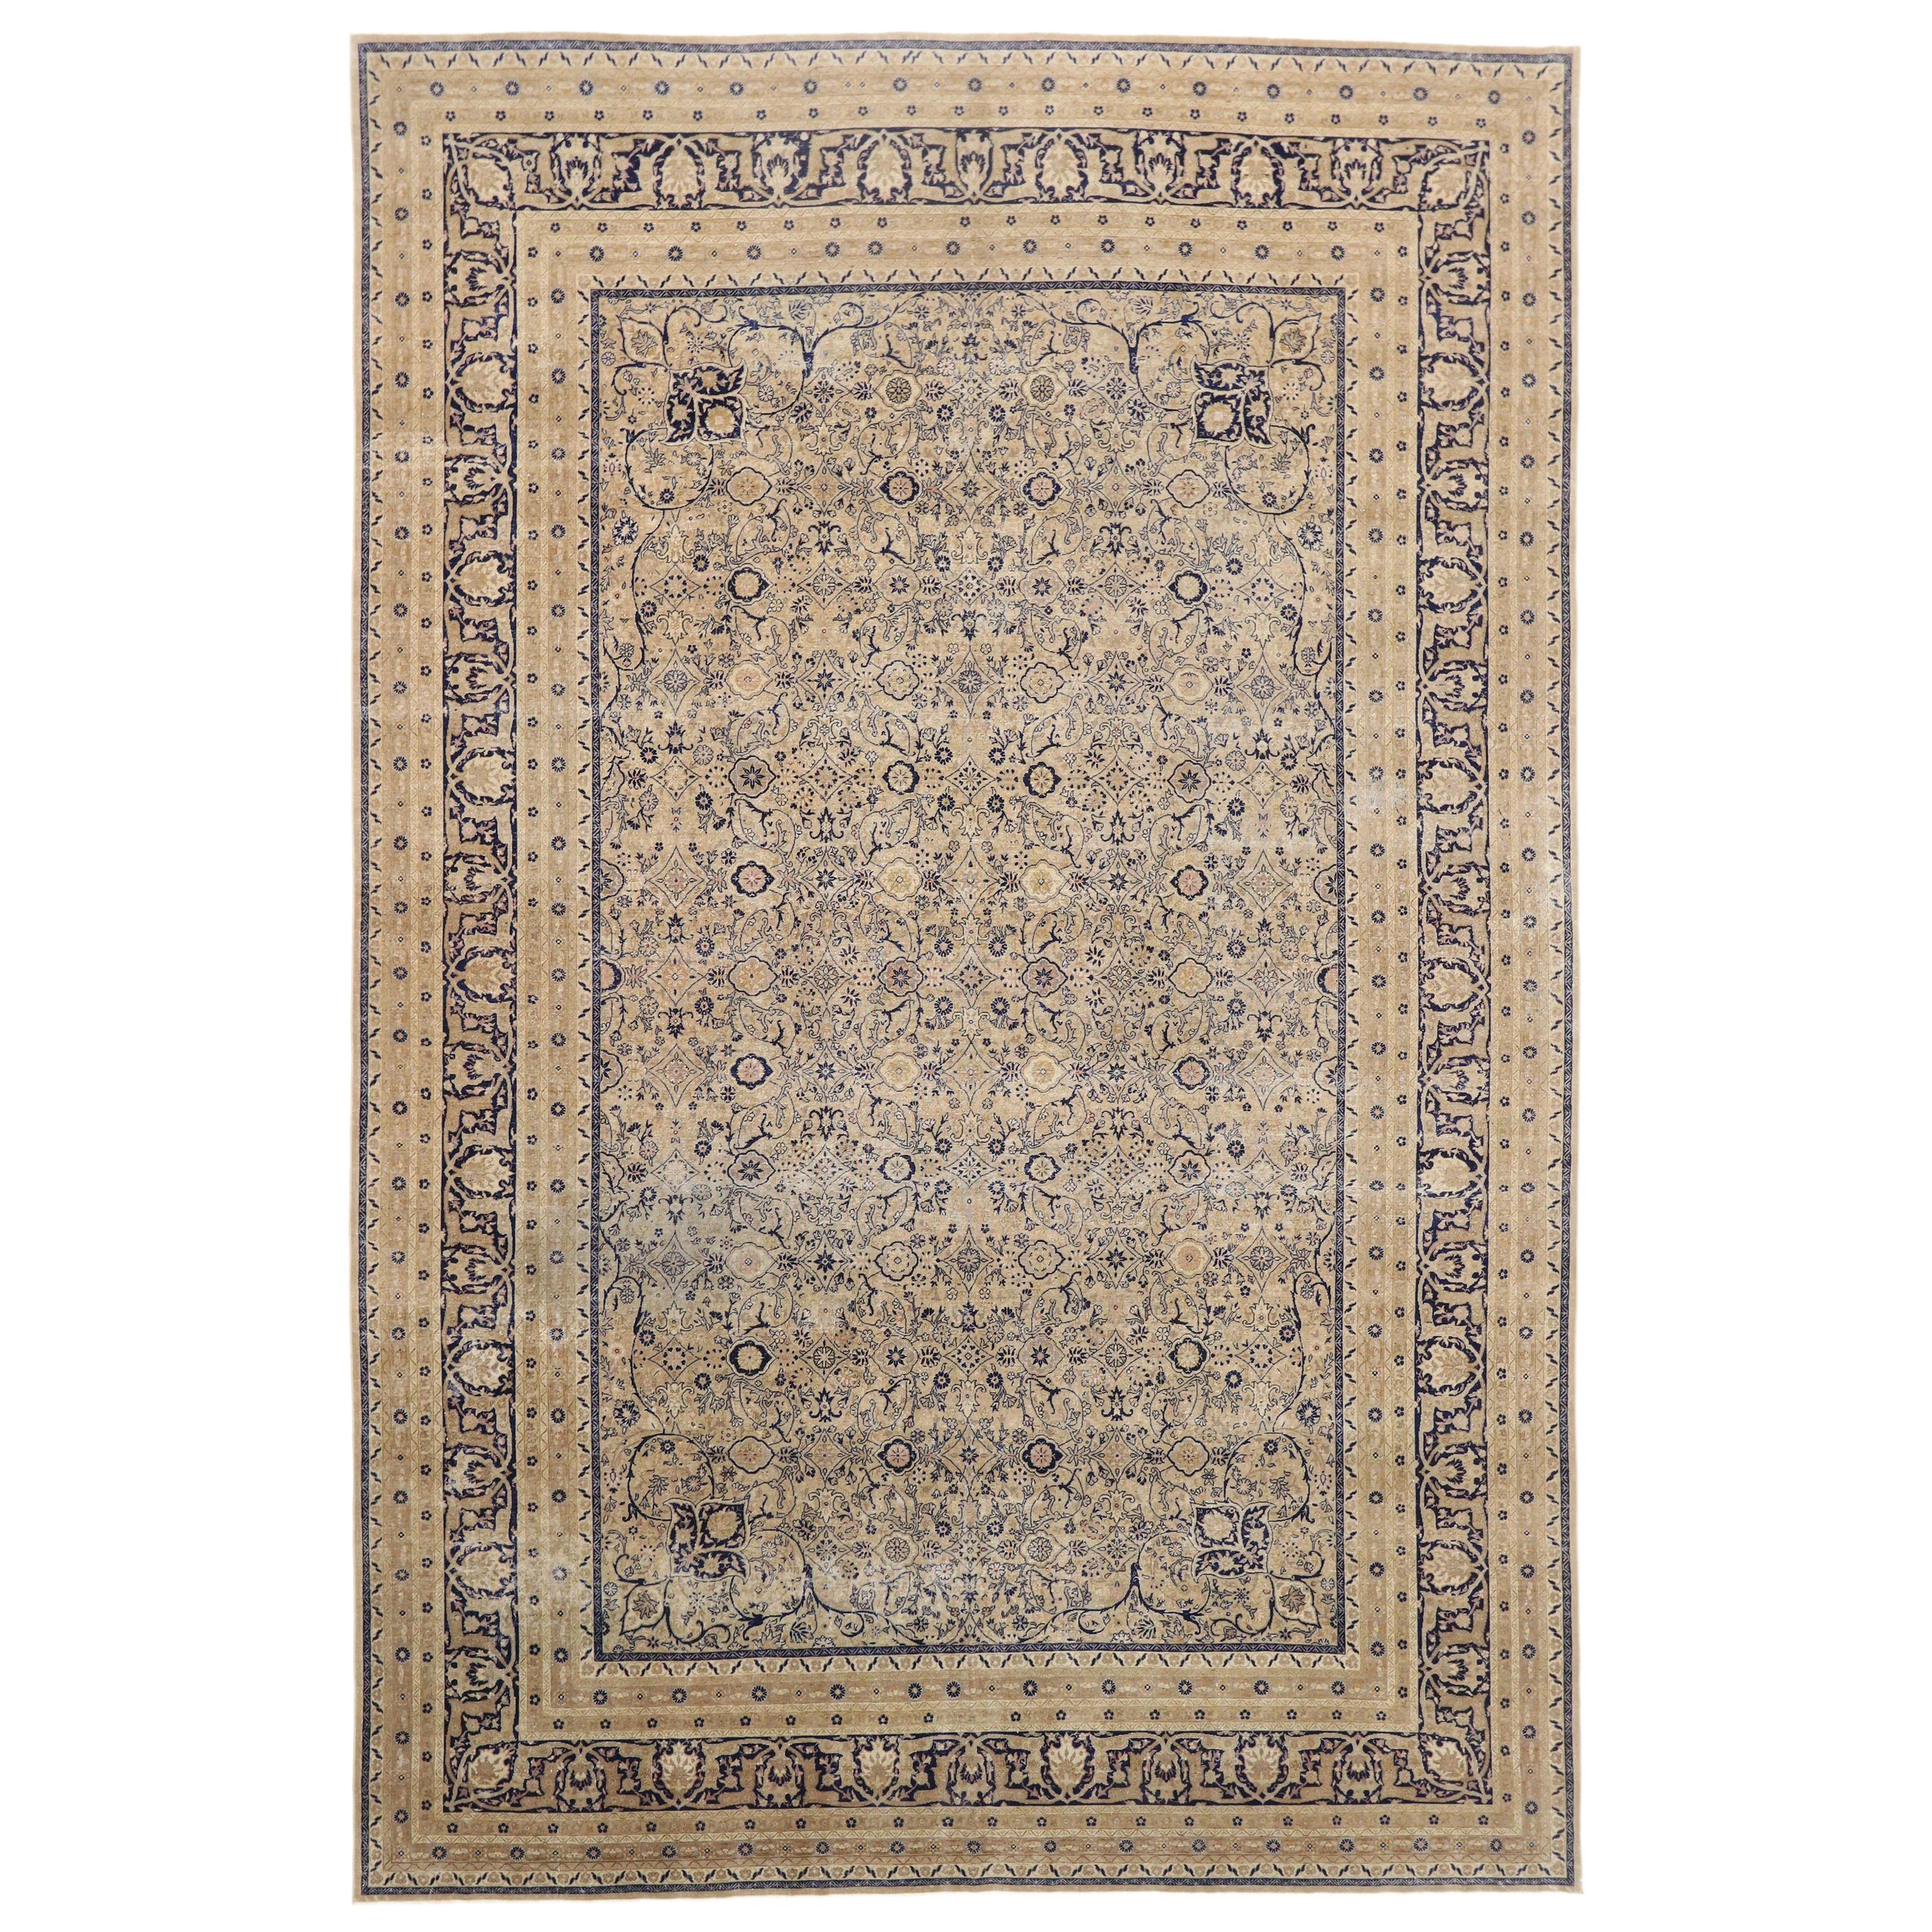 Distressed Antique Turkish Rug with British Colonial Style